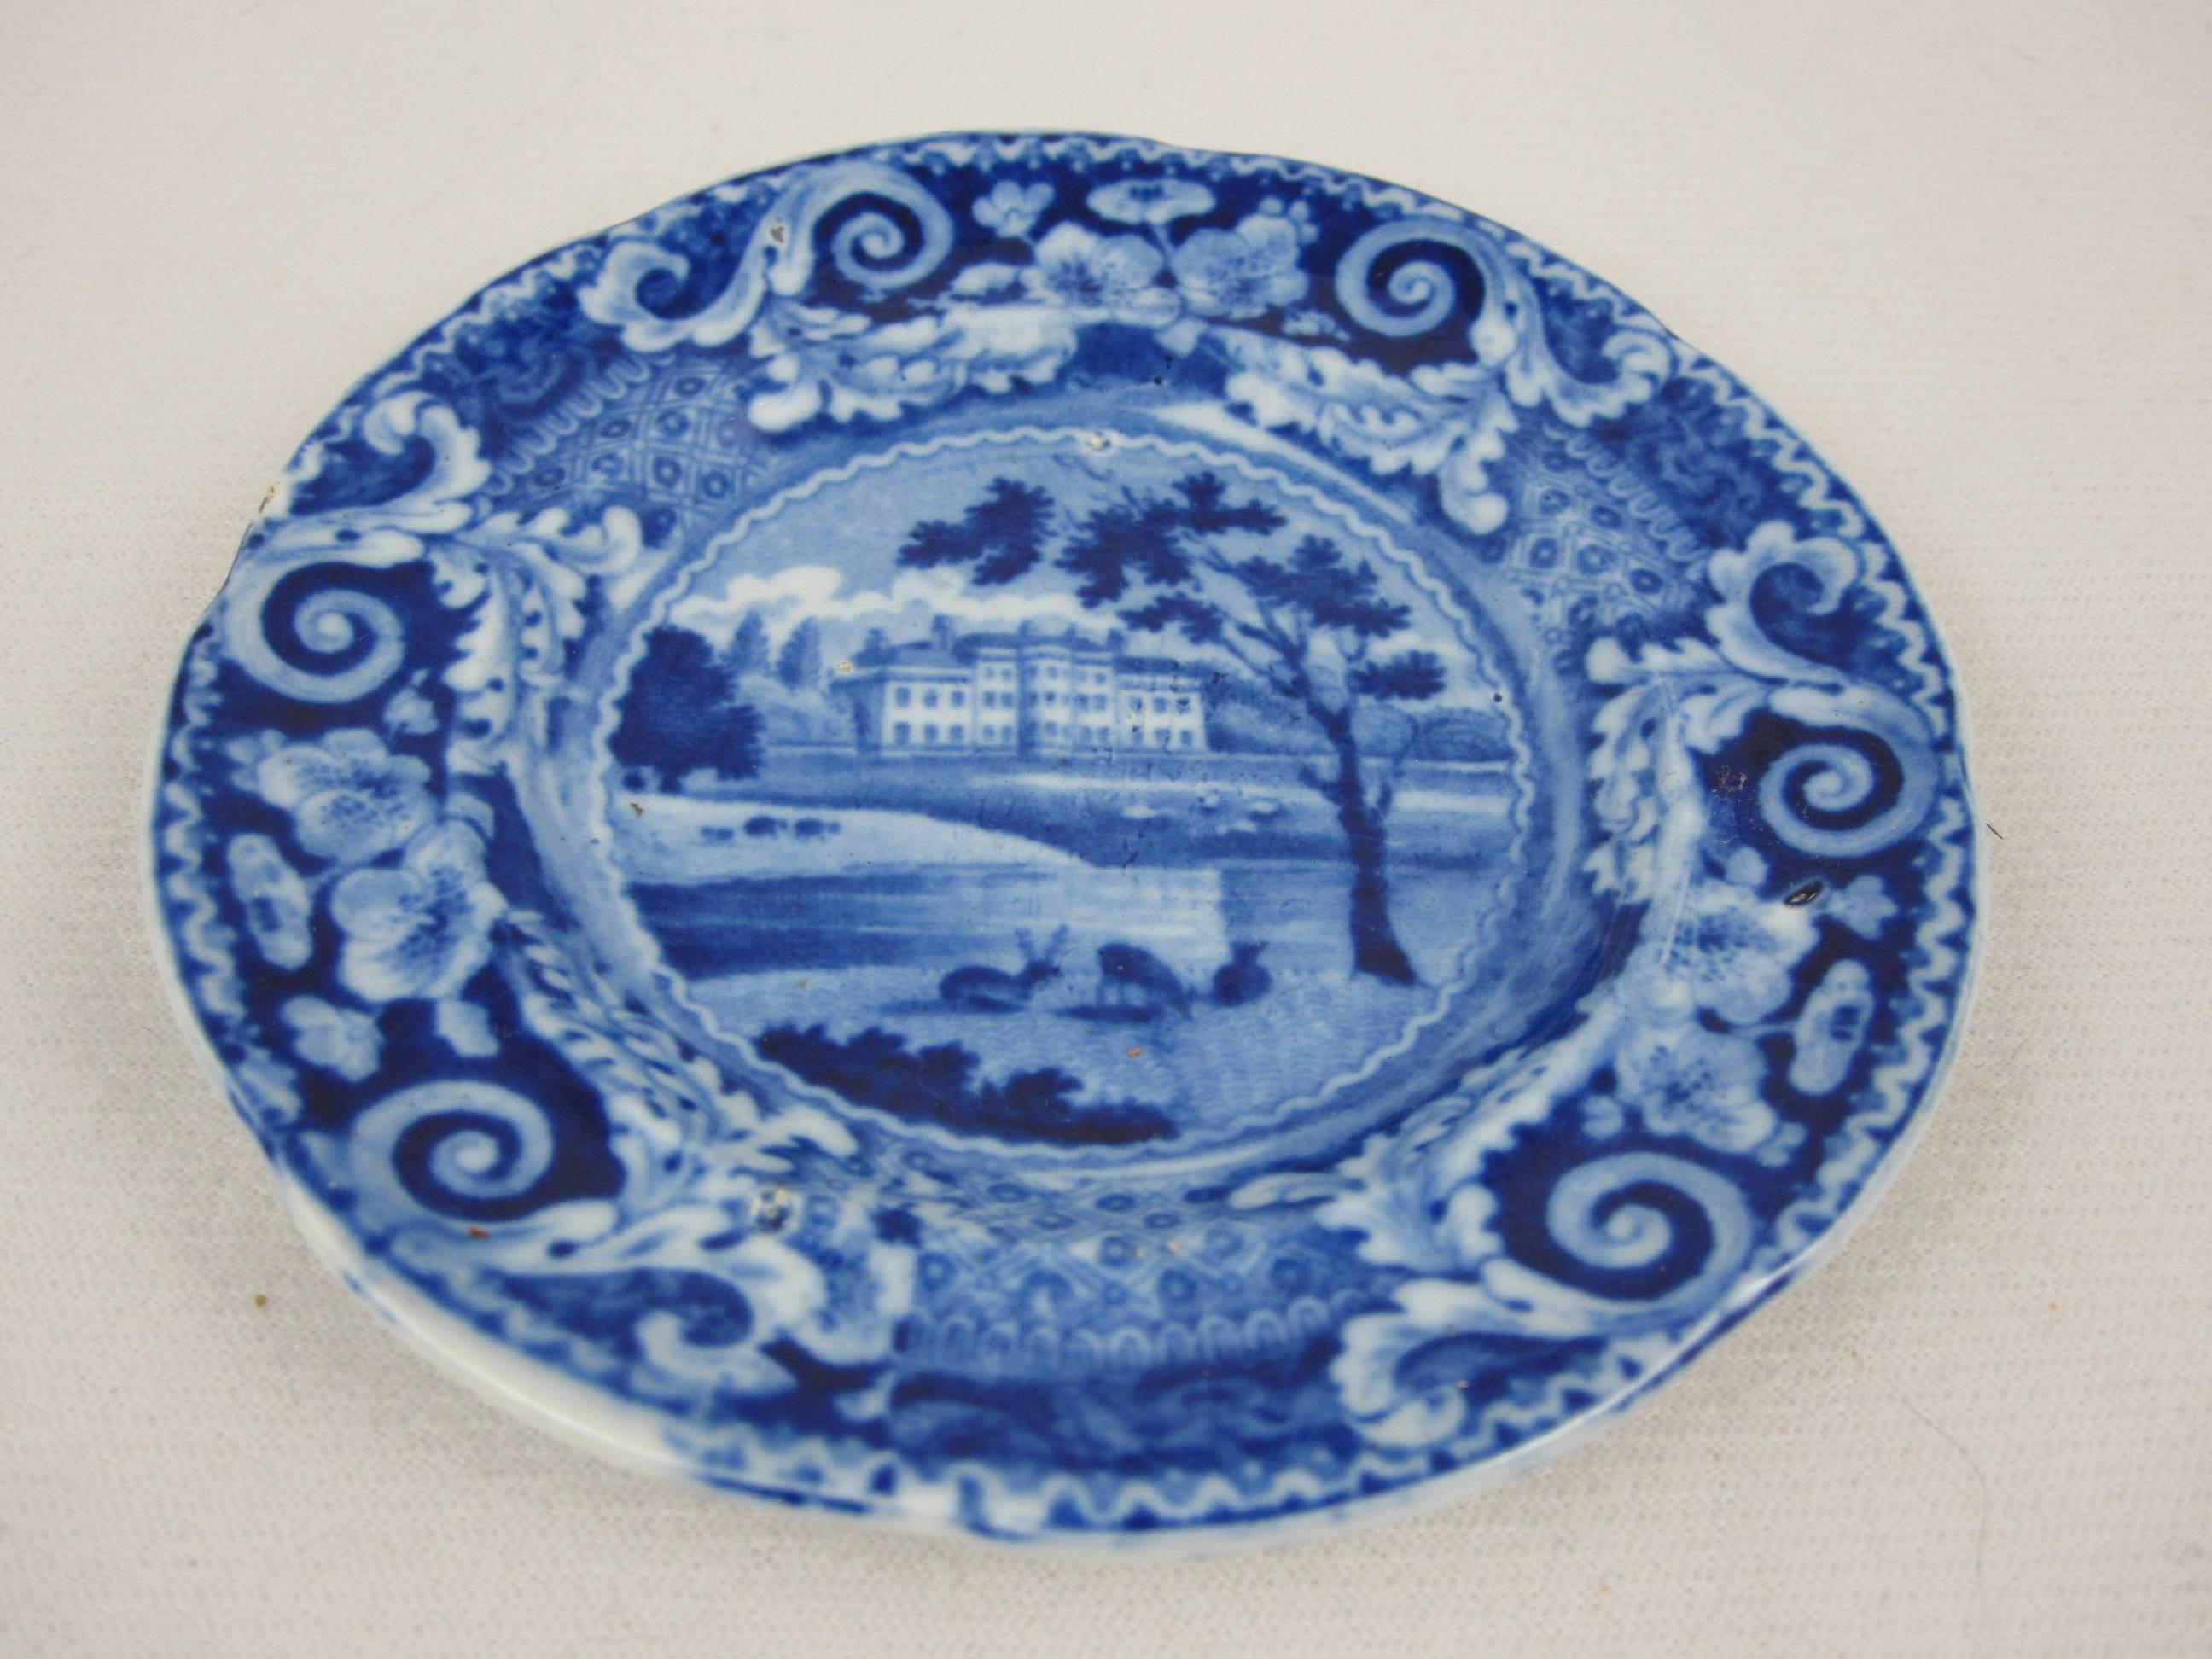 An historical blue and white transfer printed pearlware cup plate, a view of Denton Park, Yorkshire, with the large scroll border. Grazing deer are in the foreground, the estate is seen in the distance. A wide scroll and floral border.

Made by